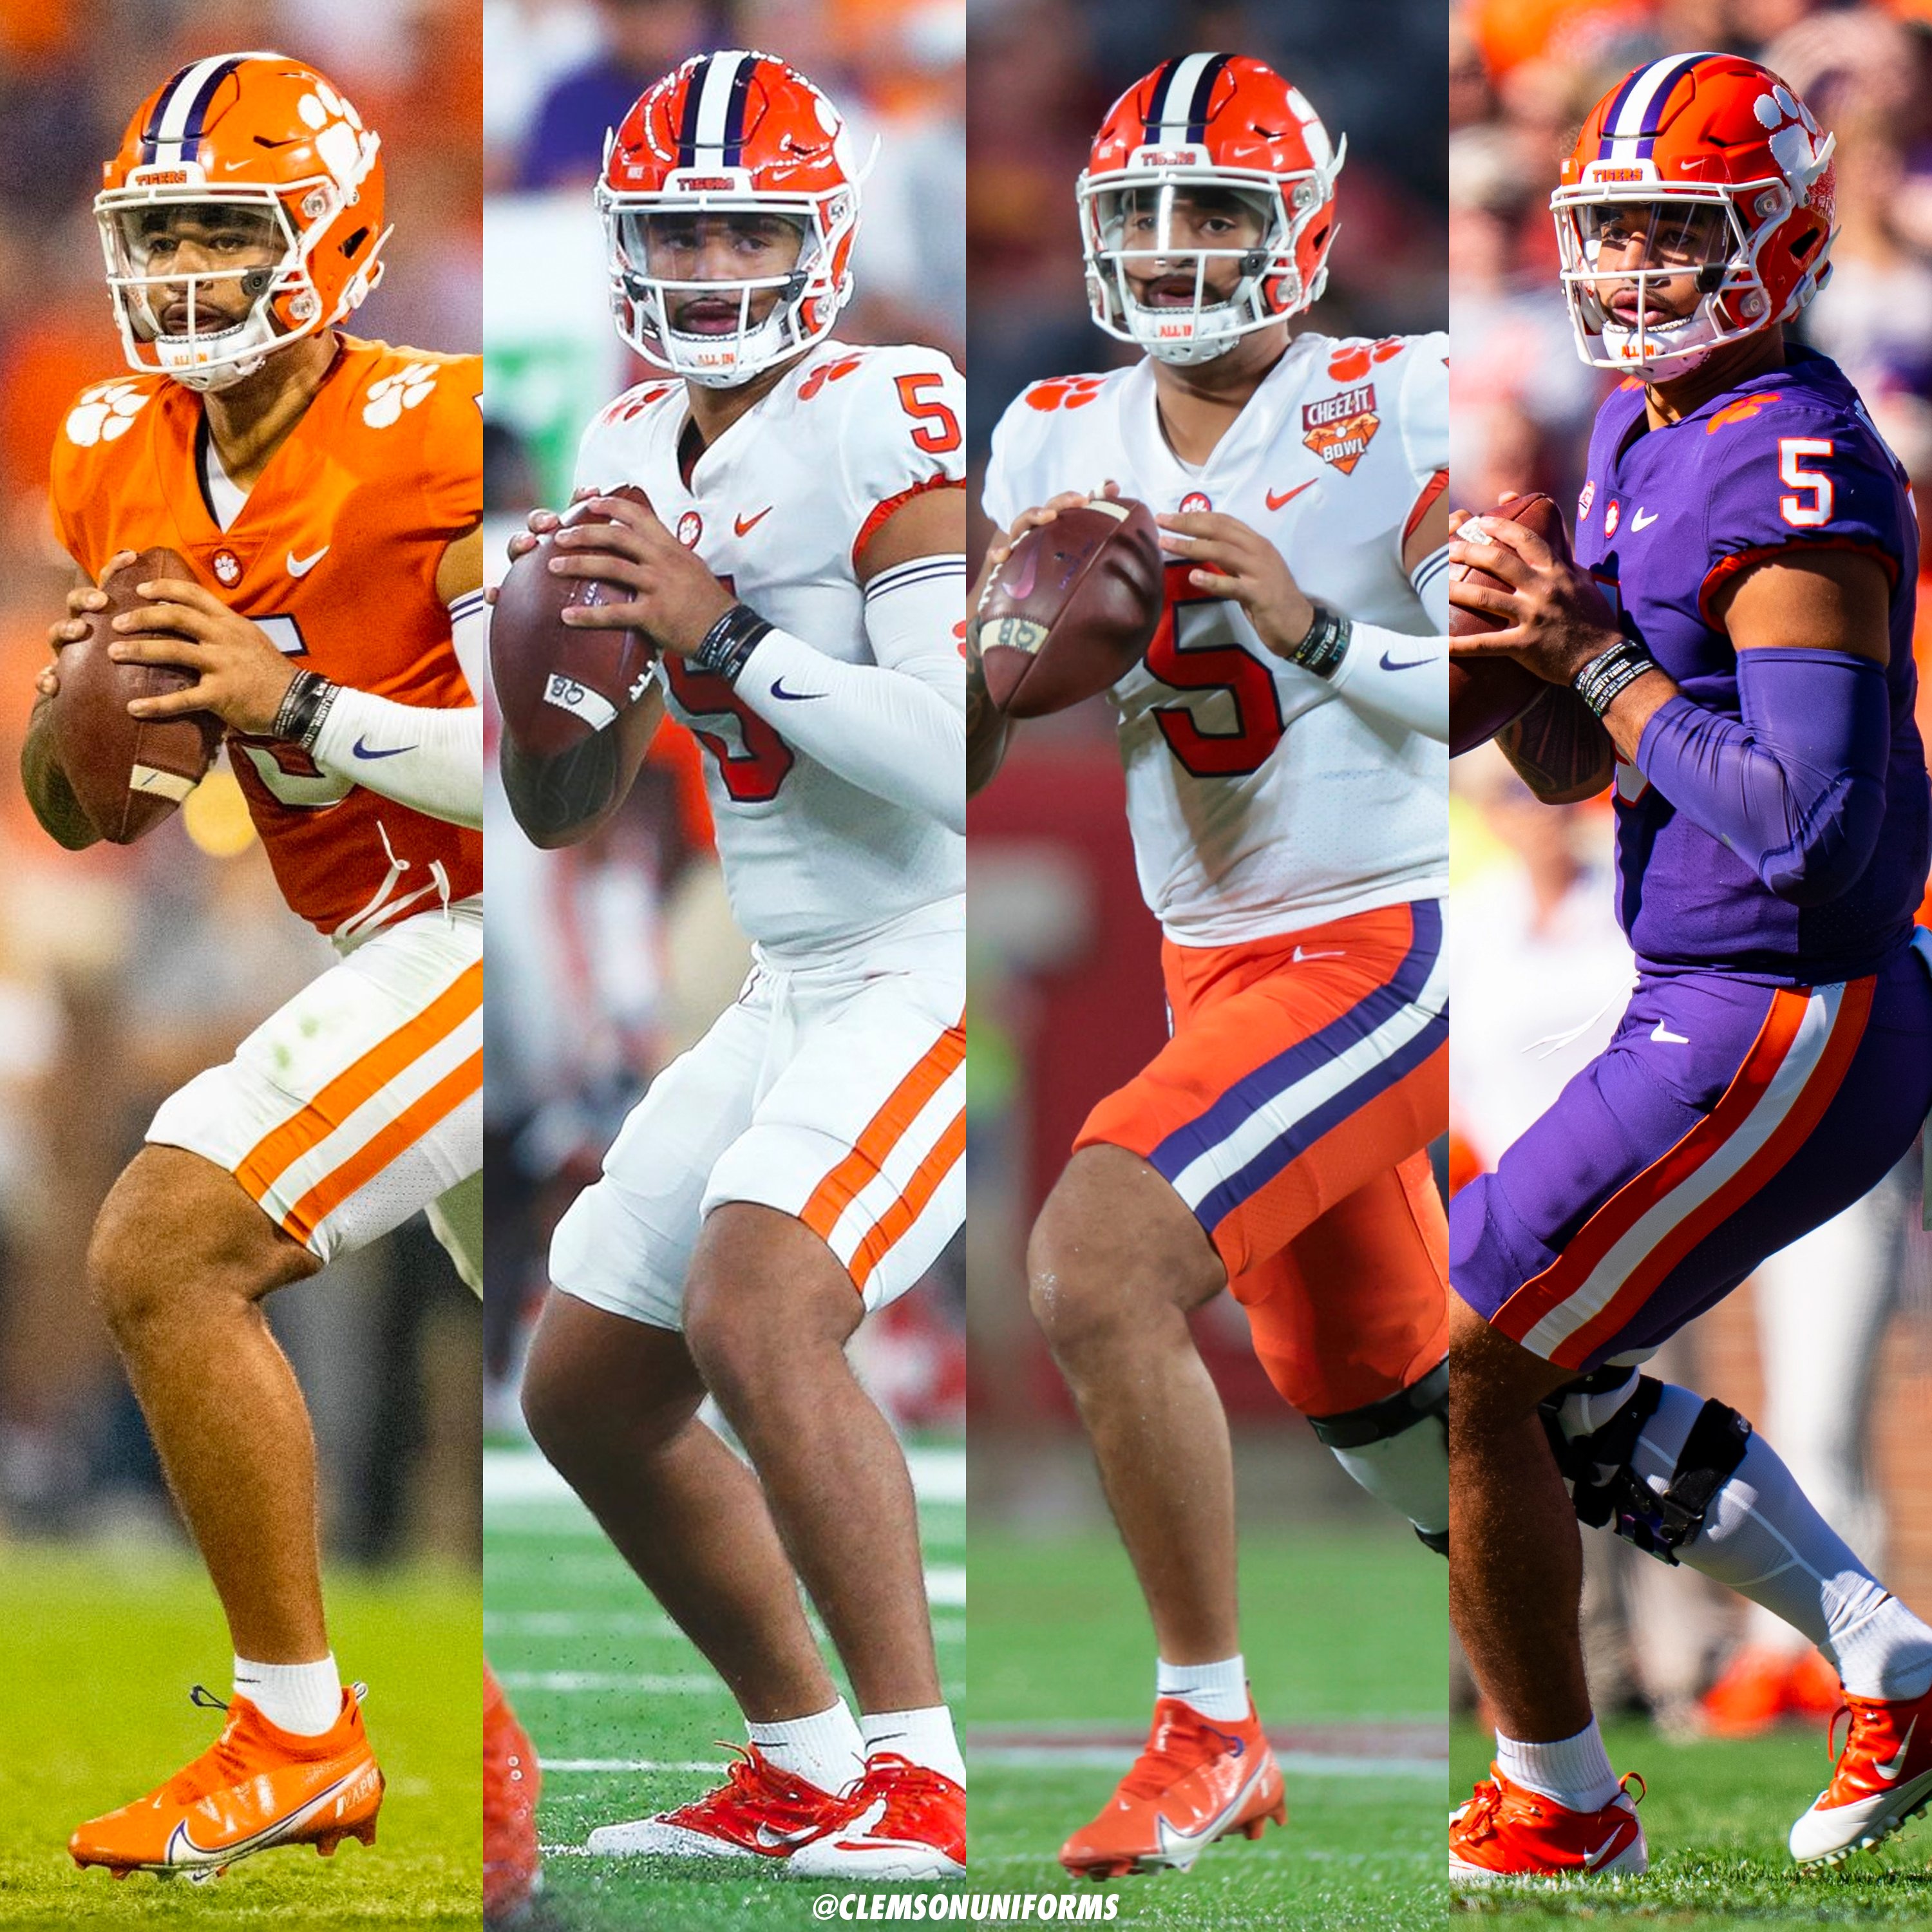 Clemson Uniform Tracker on X: 🟠🟣⚪️ As is tradition, Clemson's